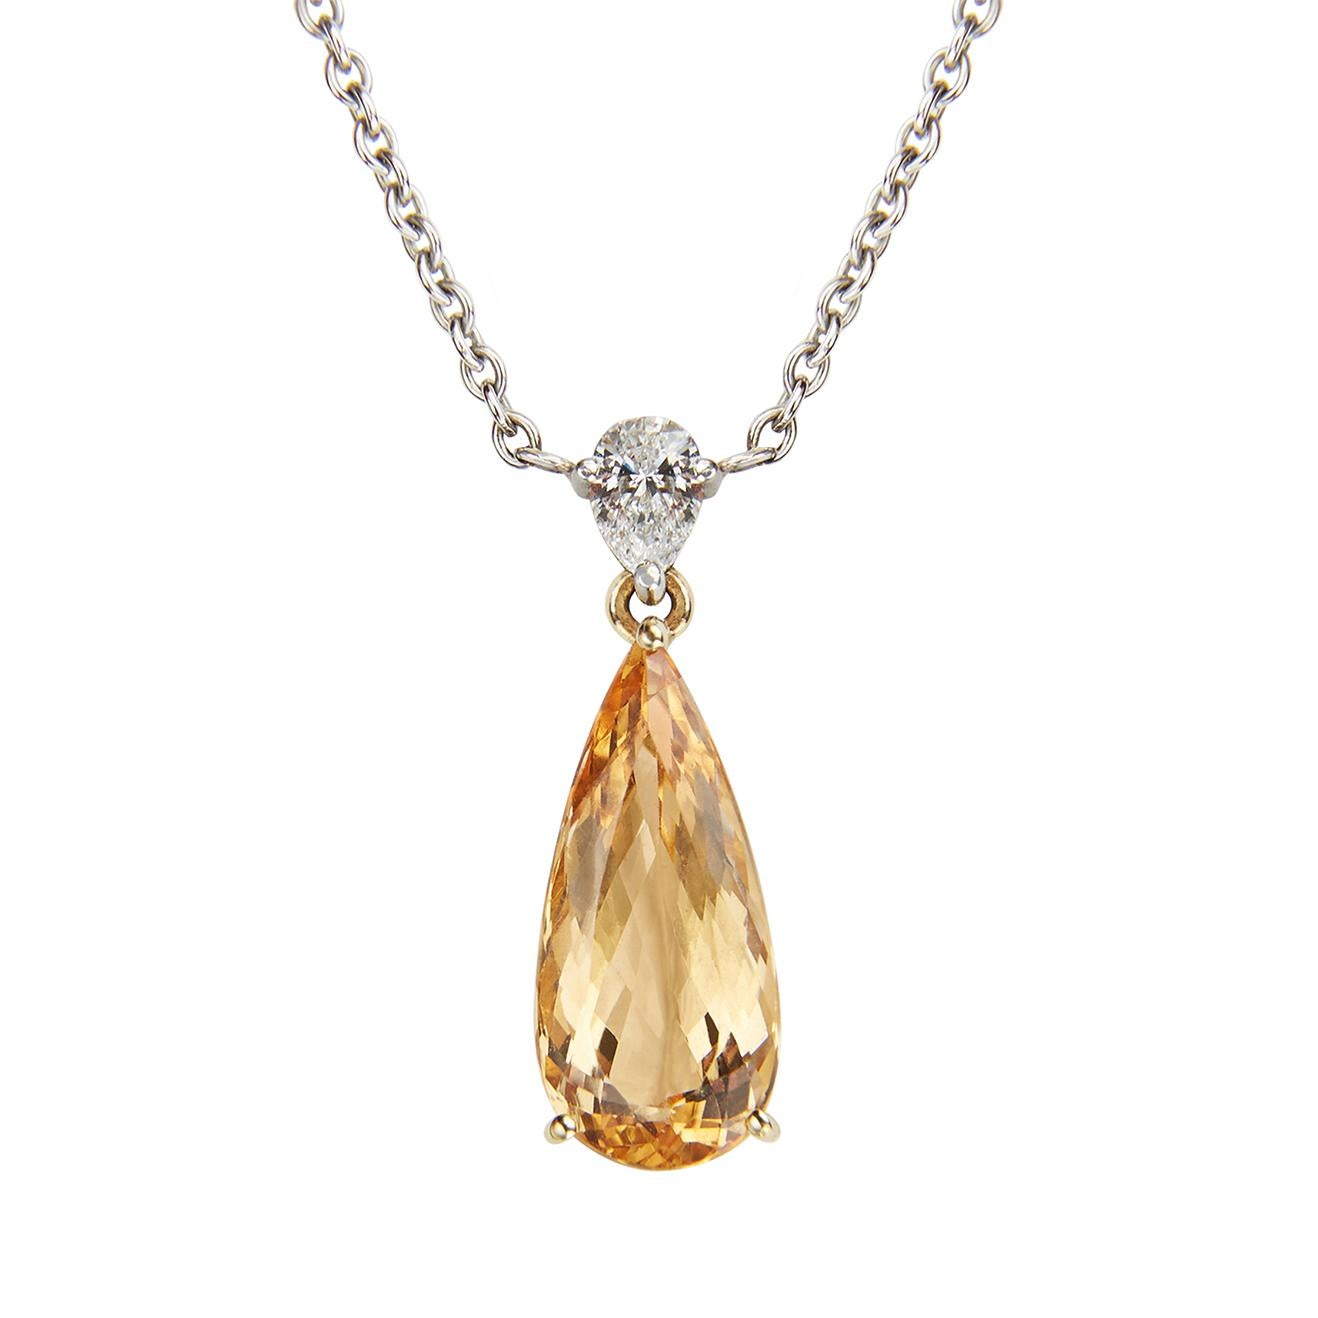 A pear shape topaz set below a pear shape diamond in the Hirsh Wallace setting.

- 1 Imperial topaz weighing 3.81 carats
- 1 pear shape diamond weighing 0.21 carats
- Handmade in platinum and 18K yellow gold in our Mayfair atelier

Formed deep